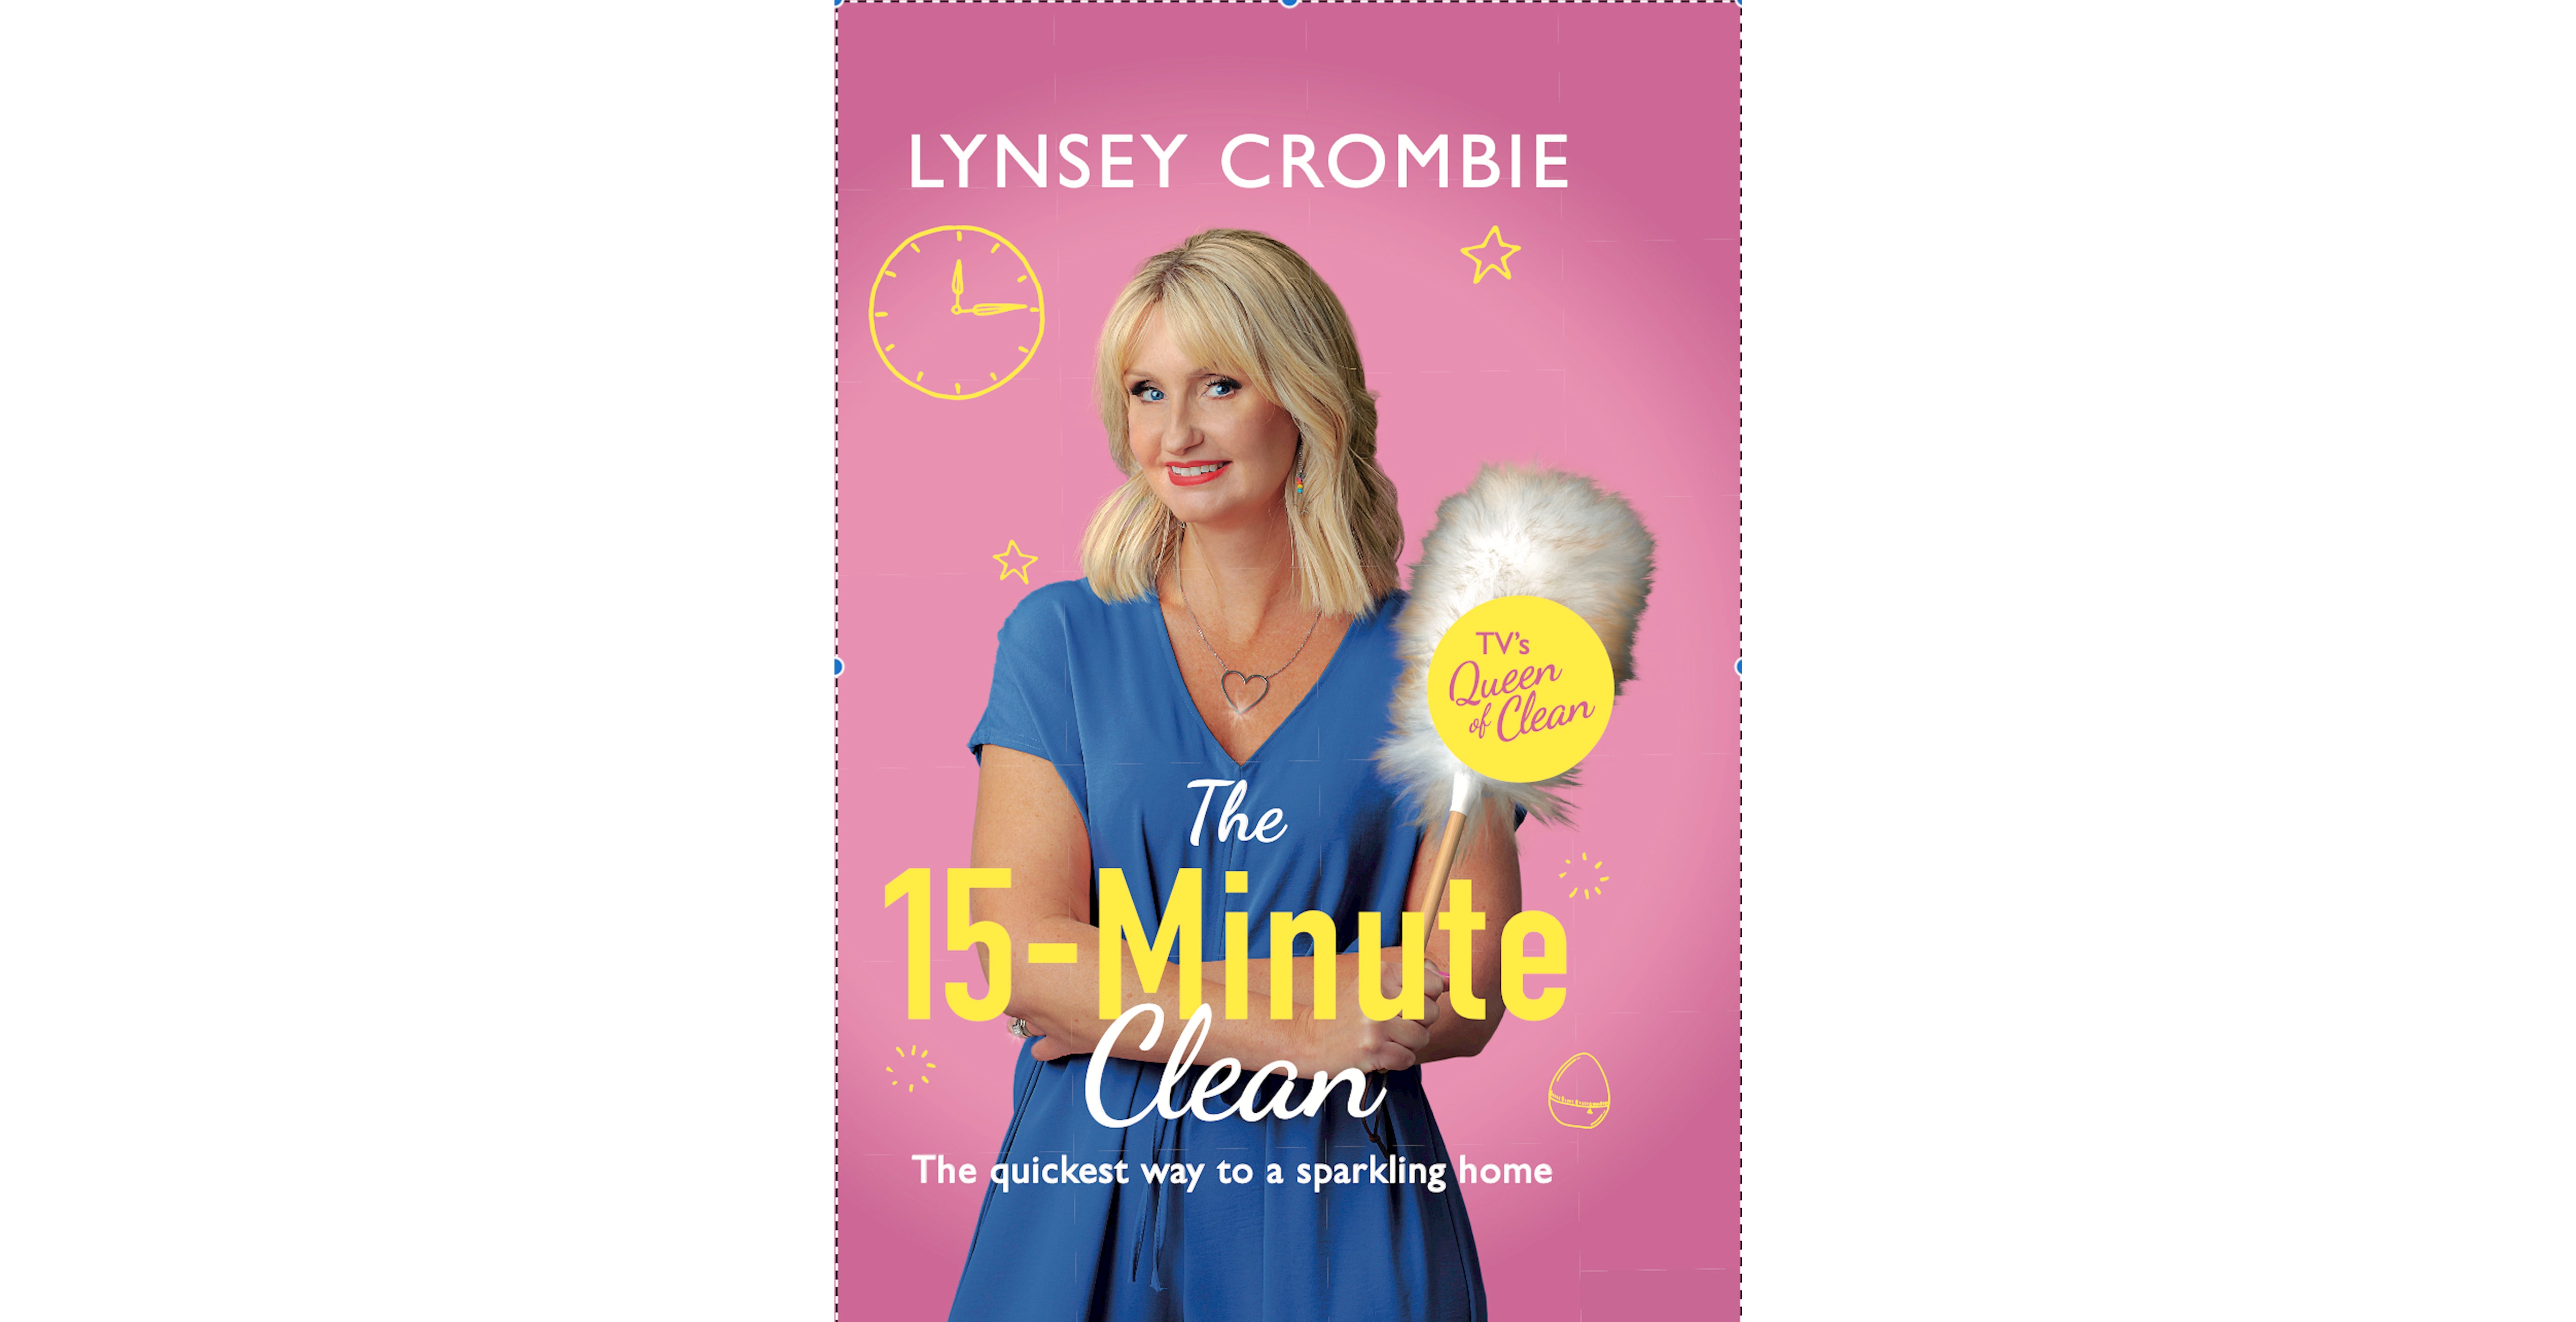 15 Minute Clean book by Lynsey Crombie